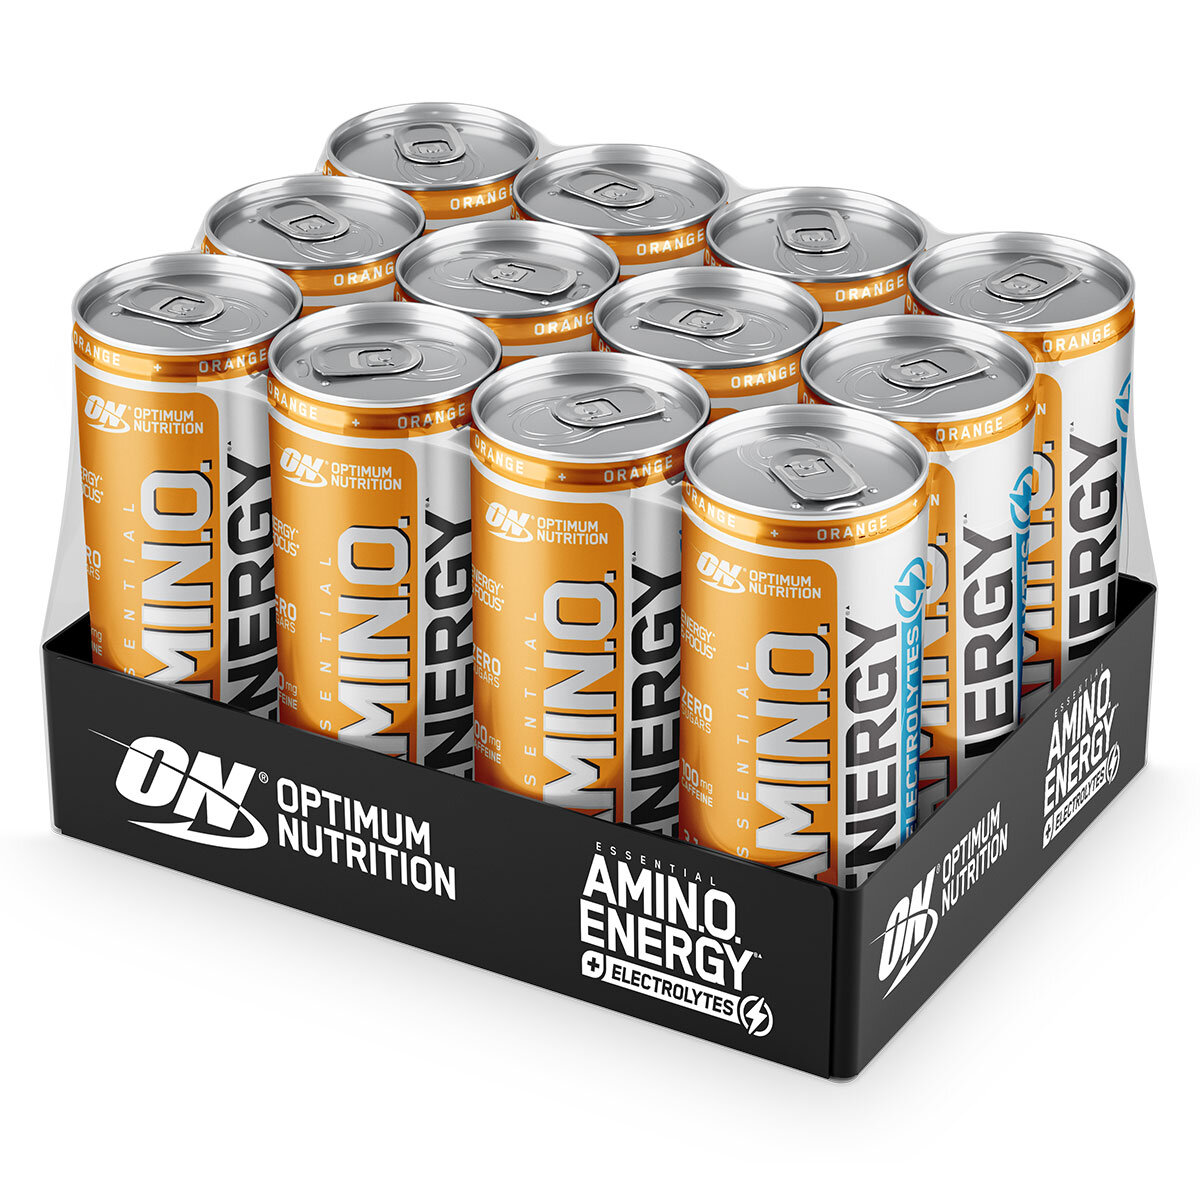 Pack of Amino Energy cans orange